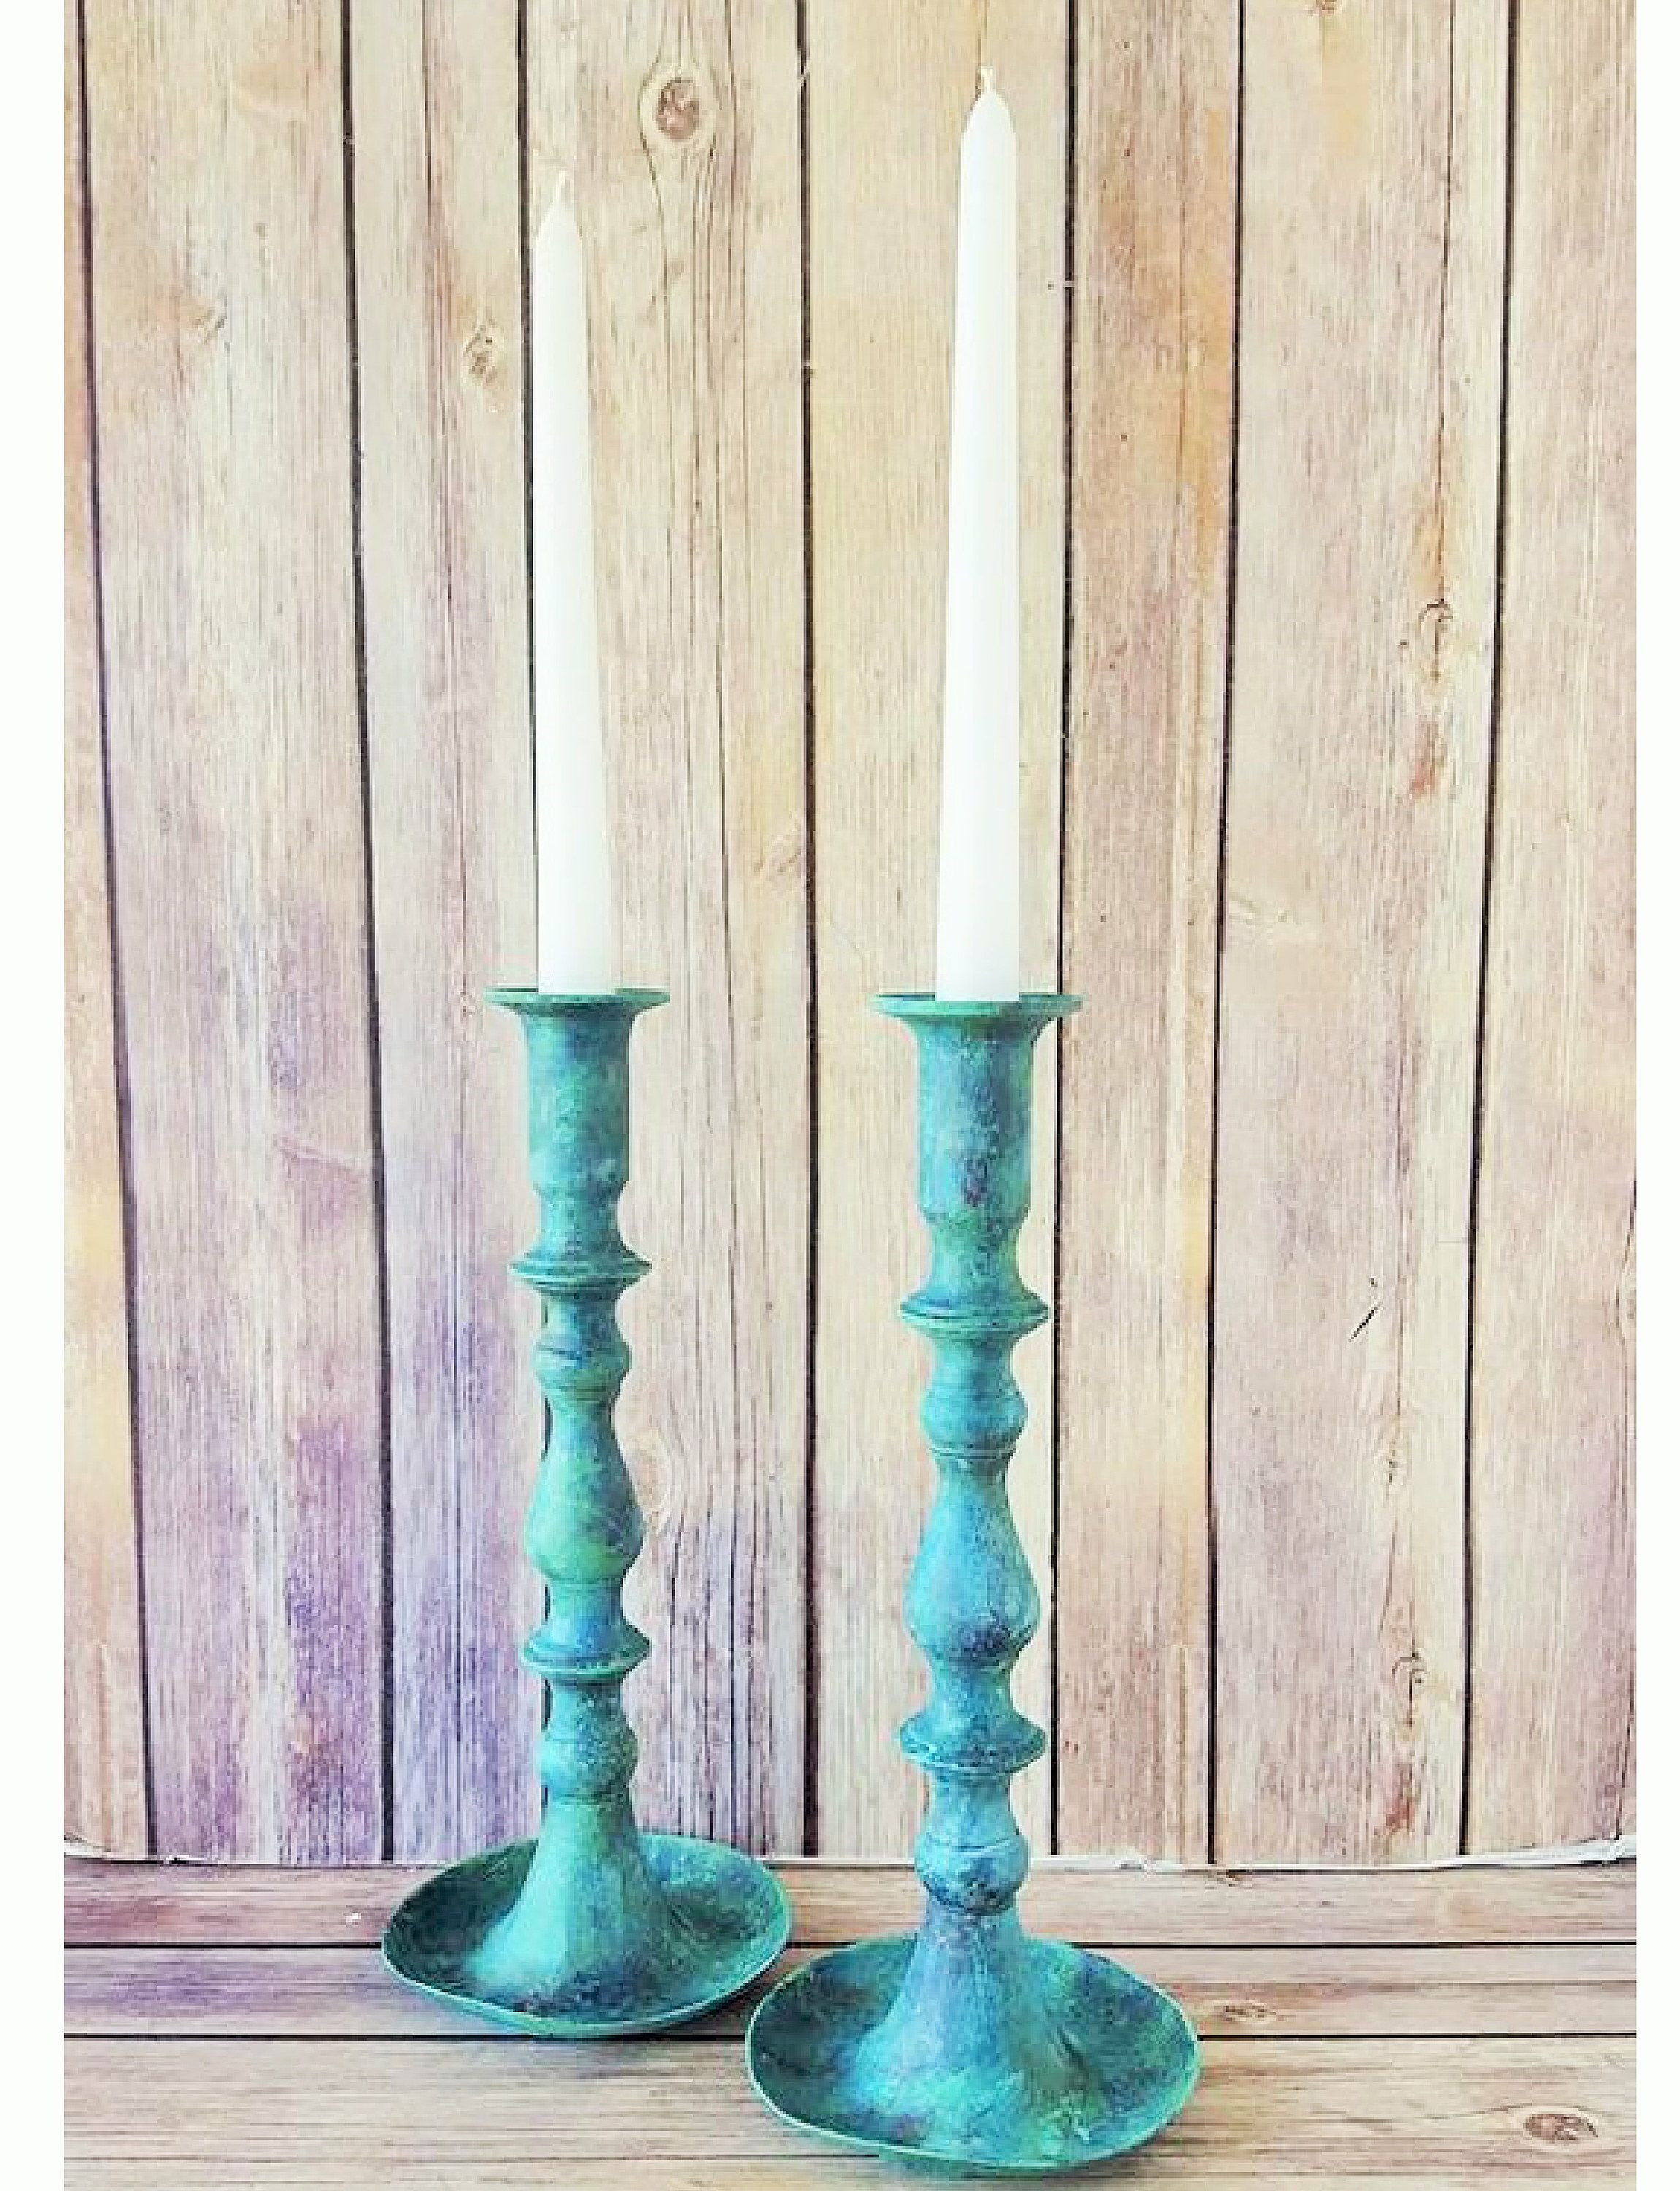 29 Nice French Country Decor Vases 2024 free download french country decor vases of turquoise candle holders painted candlesticks french country in turquoise candle holders painted candlesticks french country candle holders farmhouse home decor